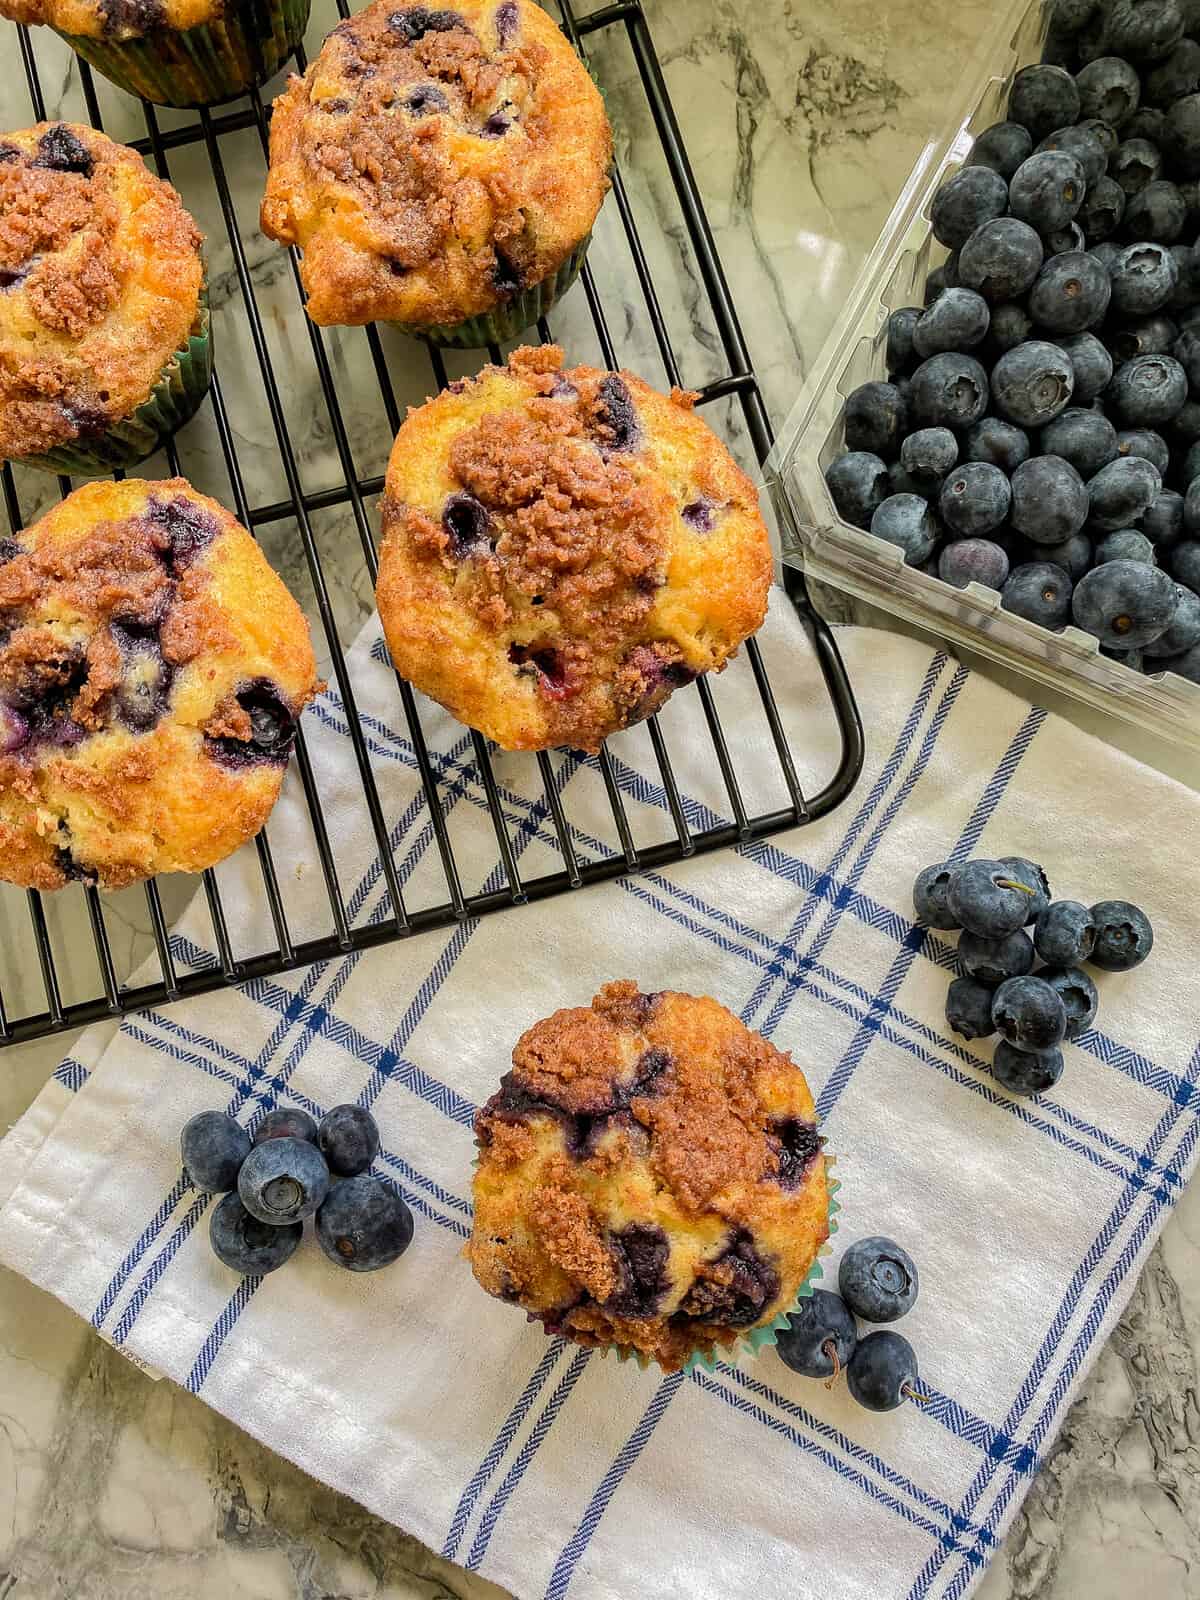 Blueberry muffins resting on a baking tray with a single muffle resting on a kitchen towel with blue berries laying around the background.